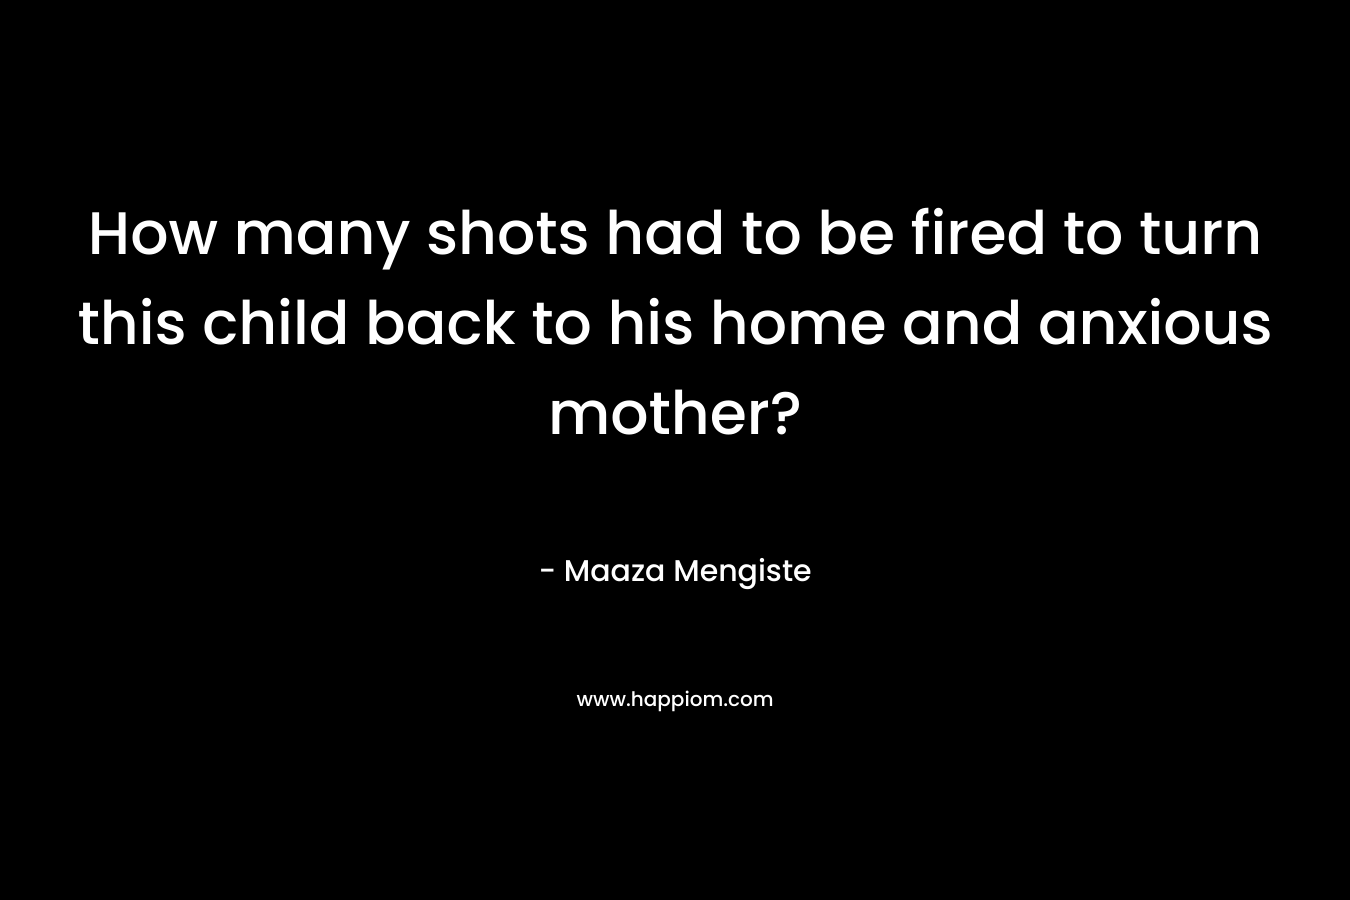 How many shots had to be fired to turn this child back to his home and anxious mother?